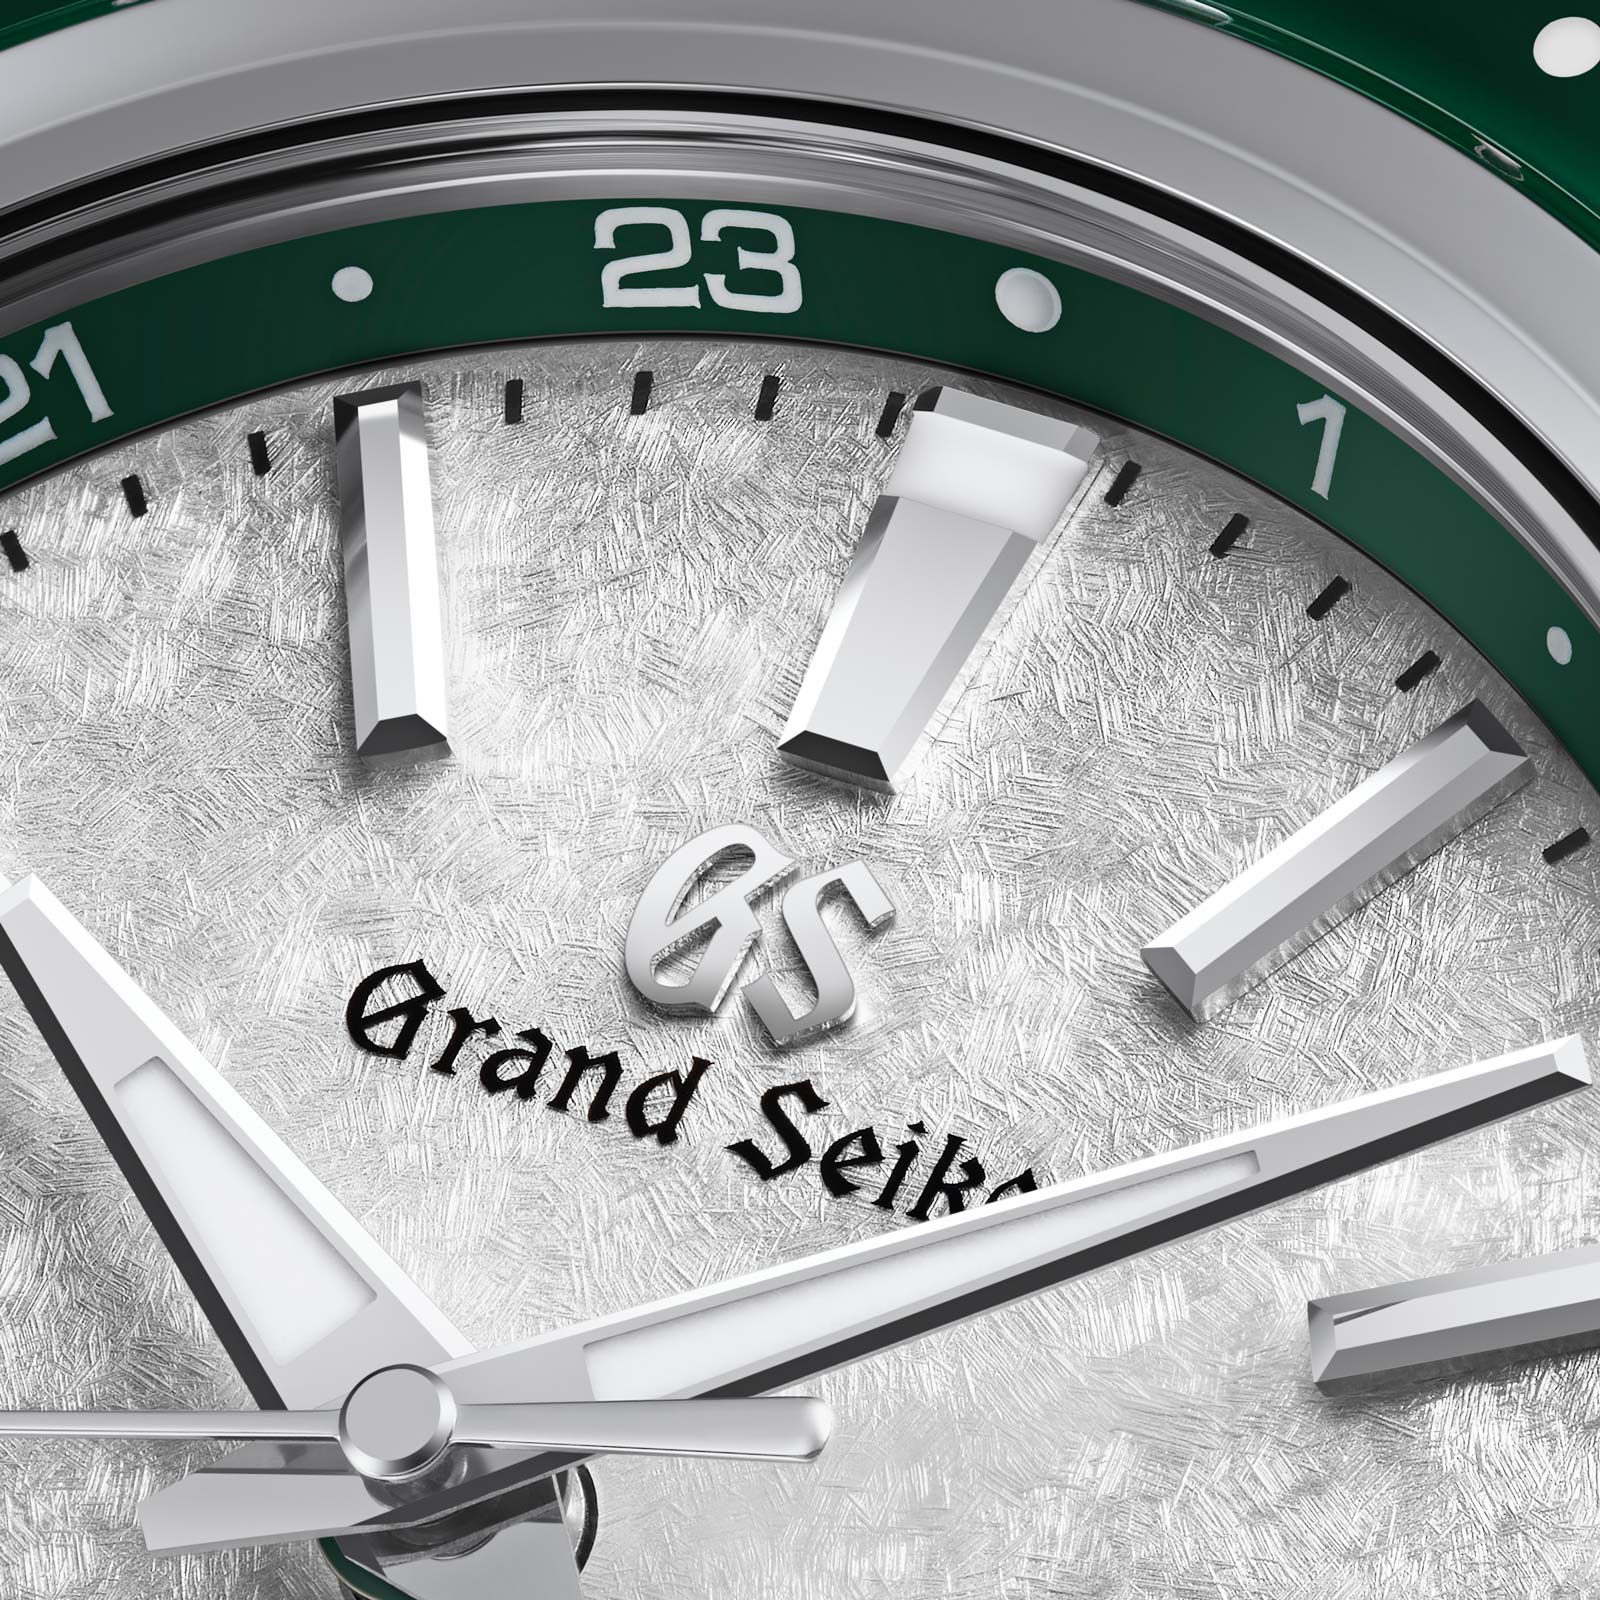 Grand Seiko Hi-Beat GMT watch with white dial and green accents